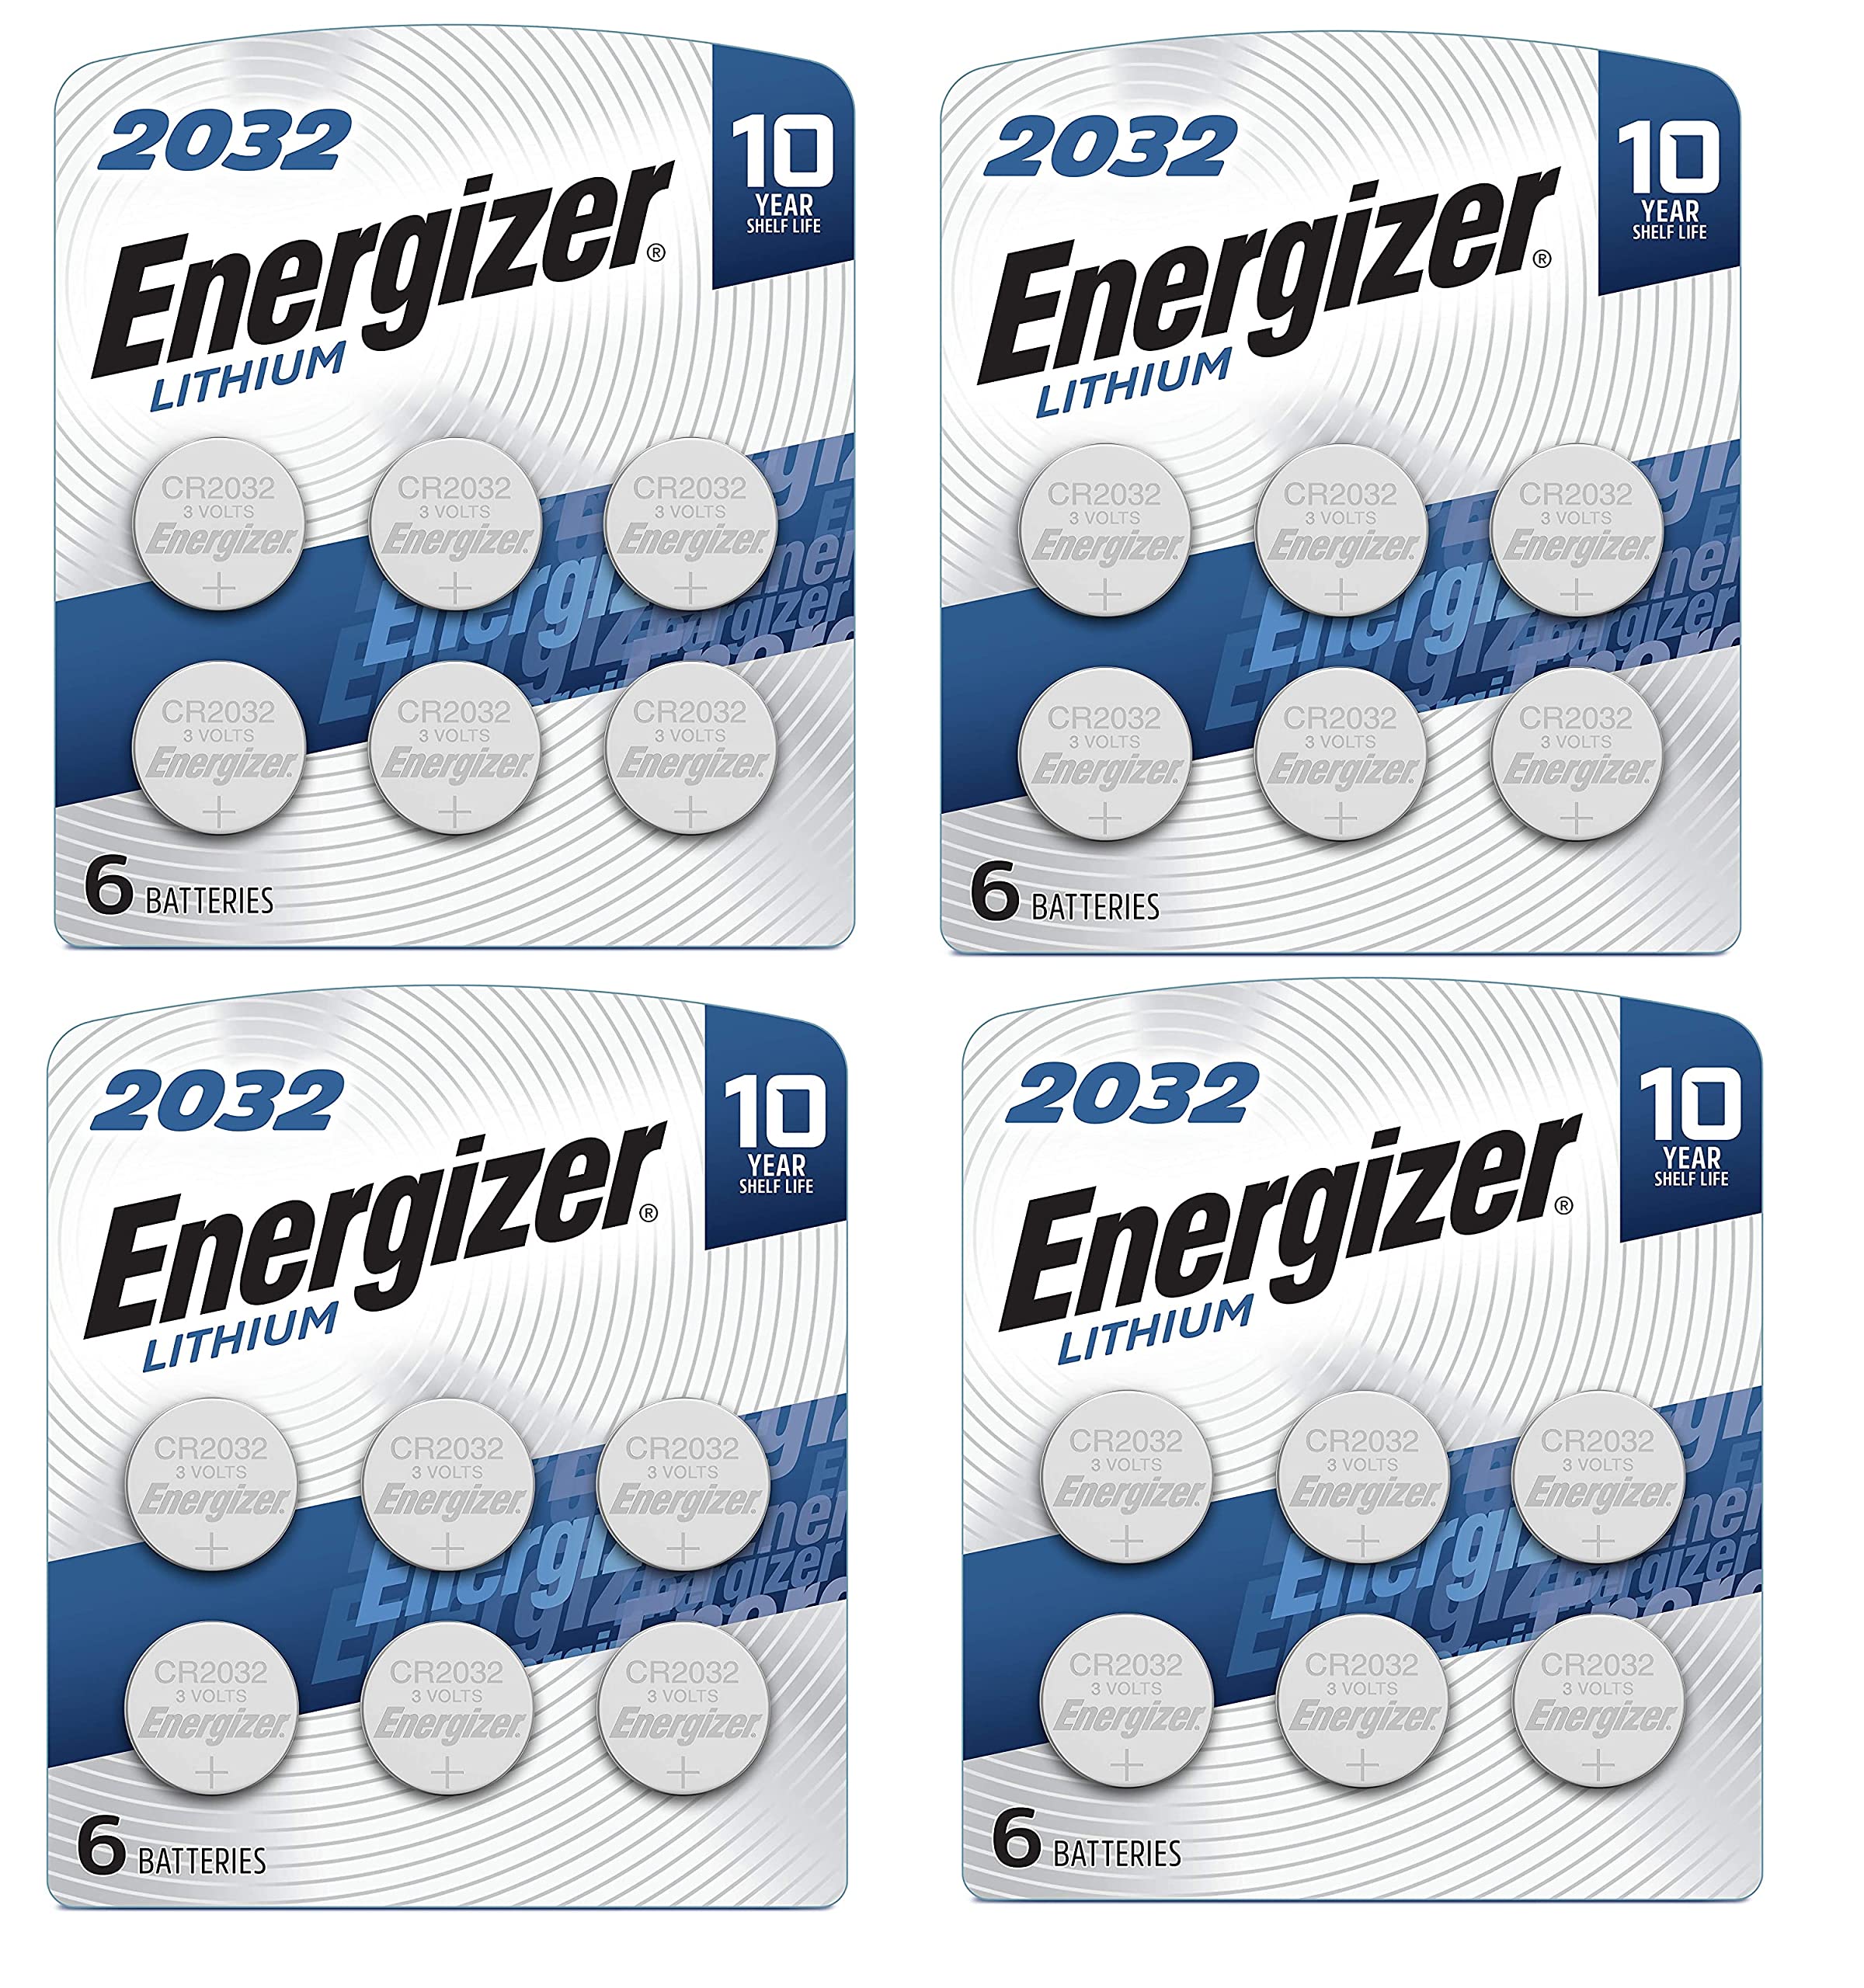 Energizer CR2032 Batteries, 3V Lithium Coin Cell 2032 Watch Battery,White (24 Count)